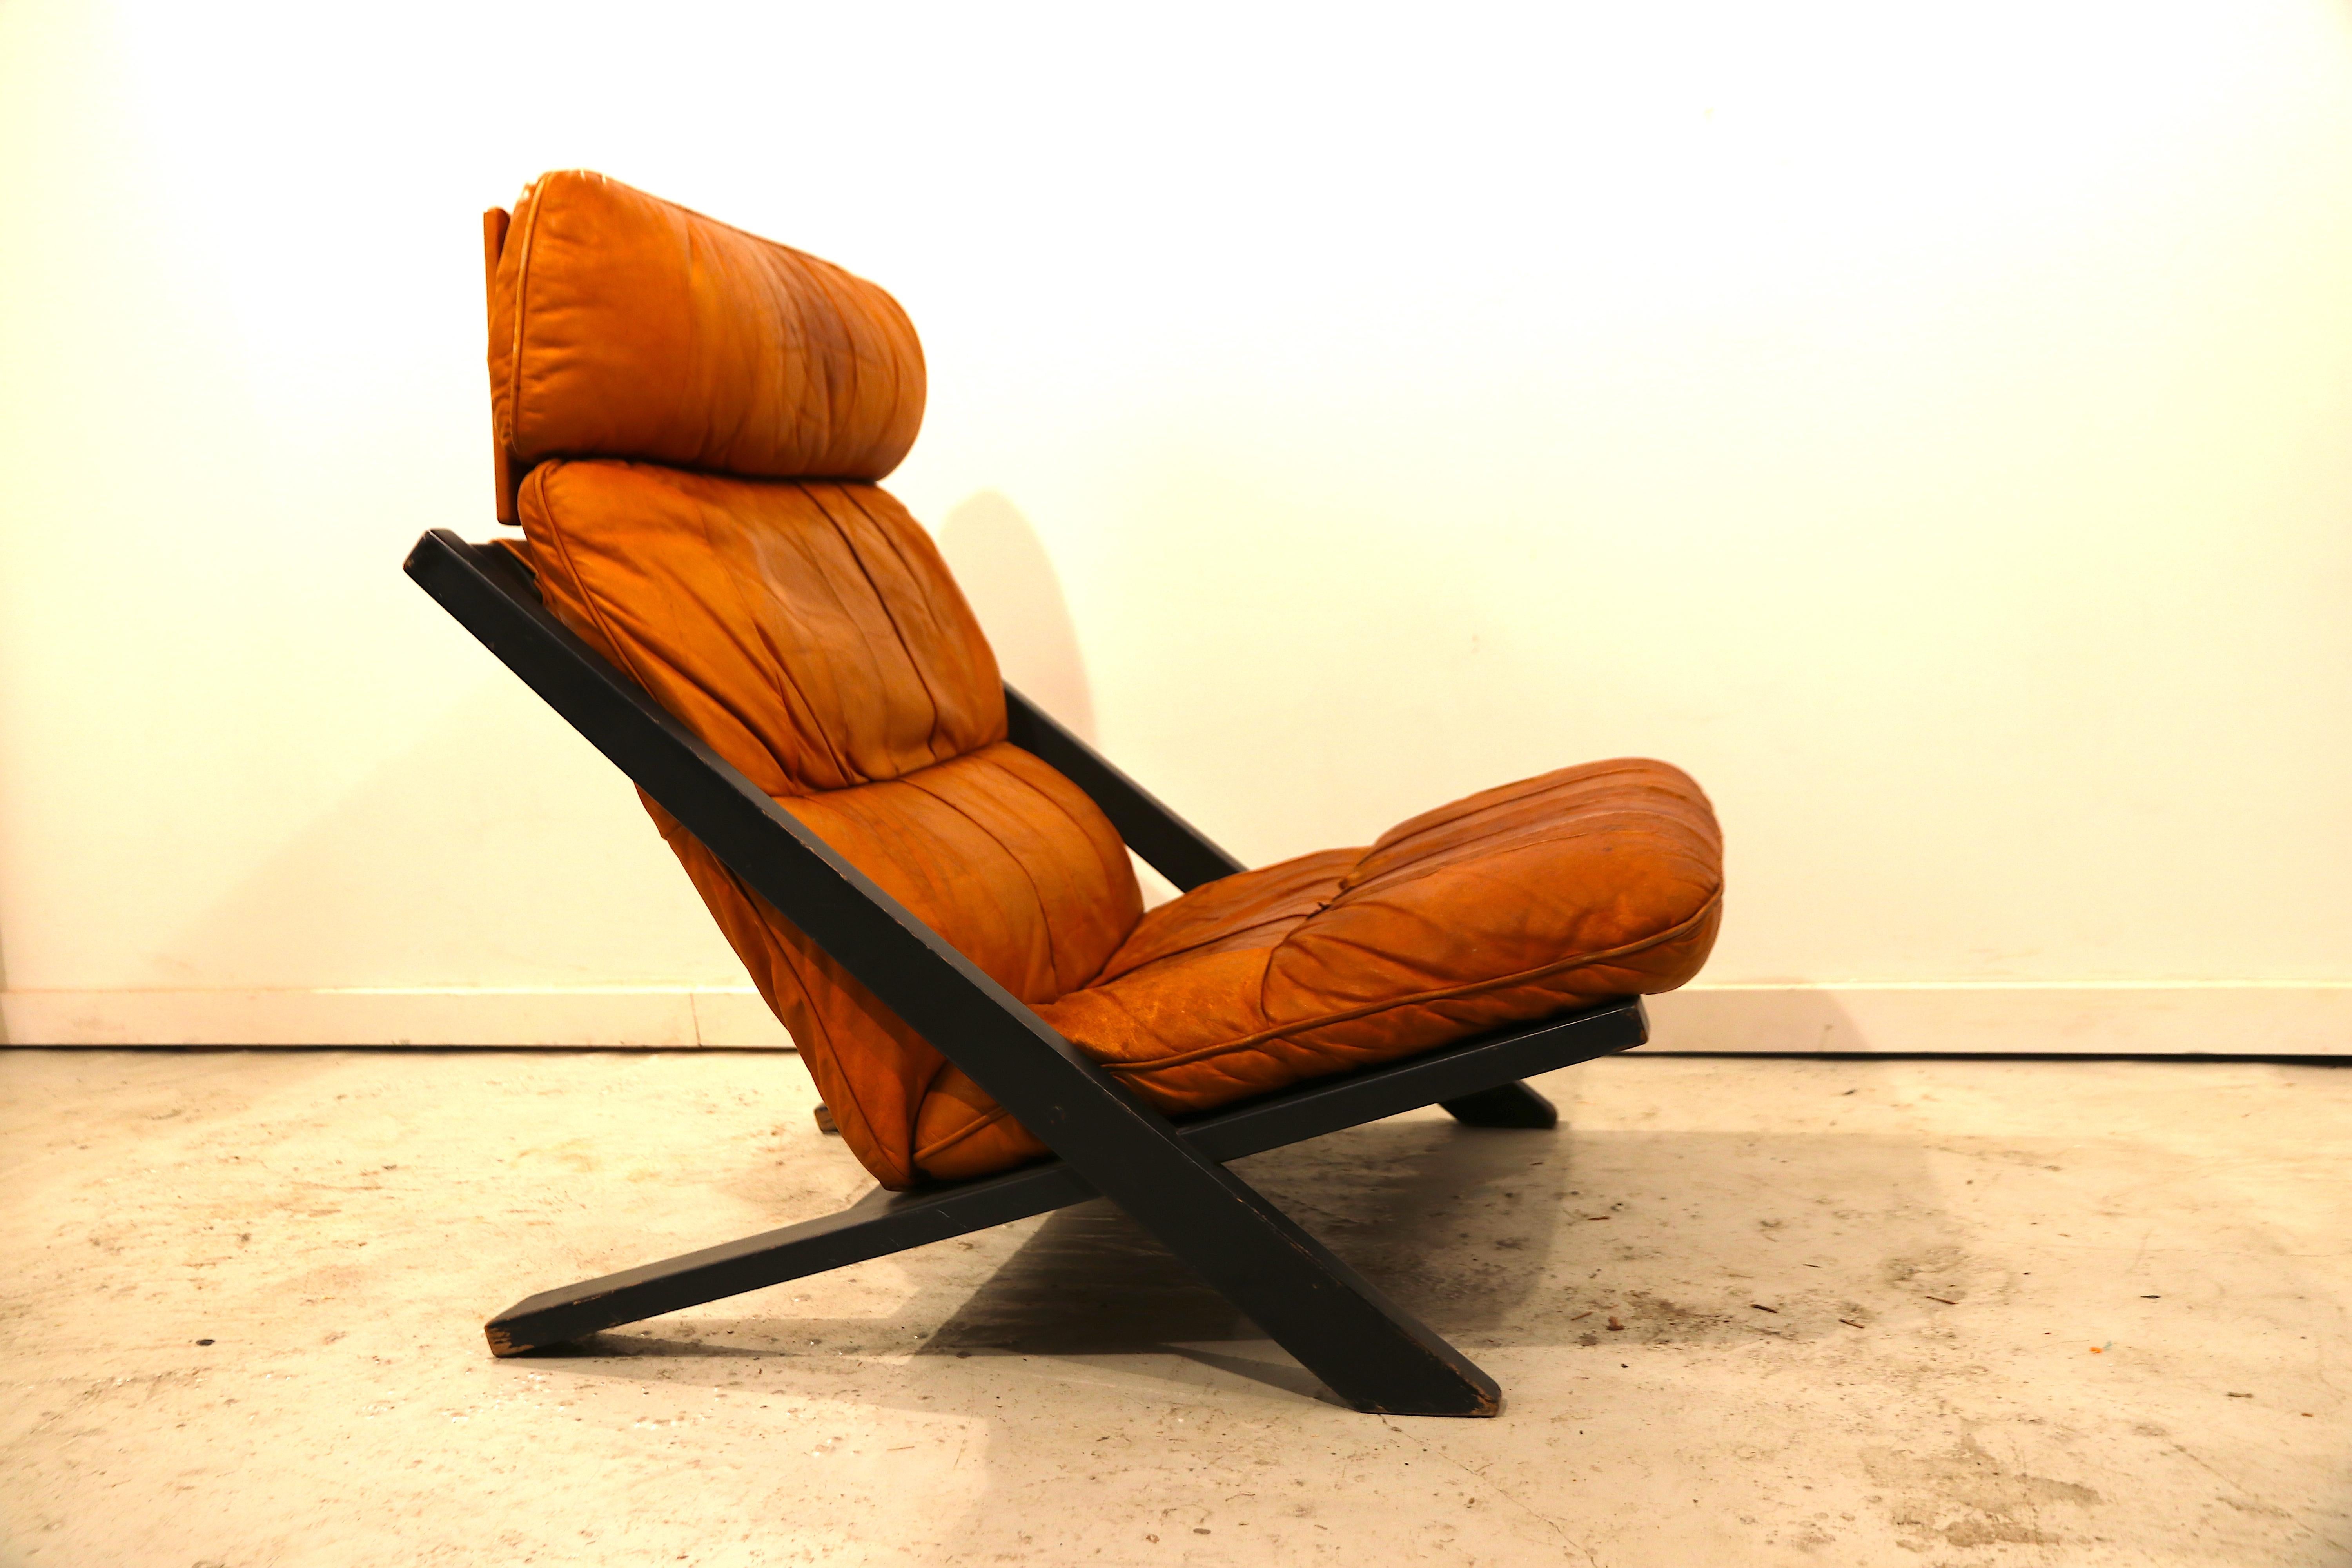 Beautiful Minimalist yet lush and comfortable lounge chair designed by Ueli bergere for the Swiss high-end furniture company De Sede. This chair has the 'right' colors, light brandy-brown tanned leather and an ebonies wood frame. The chair is in